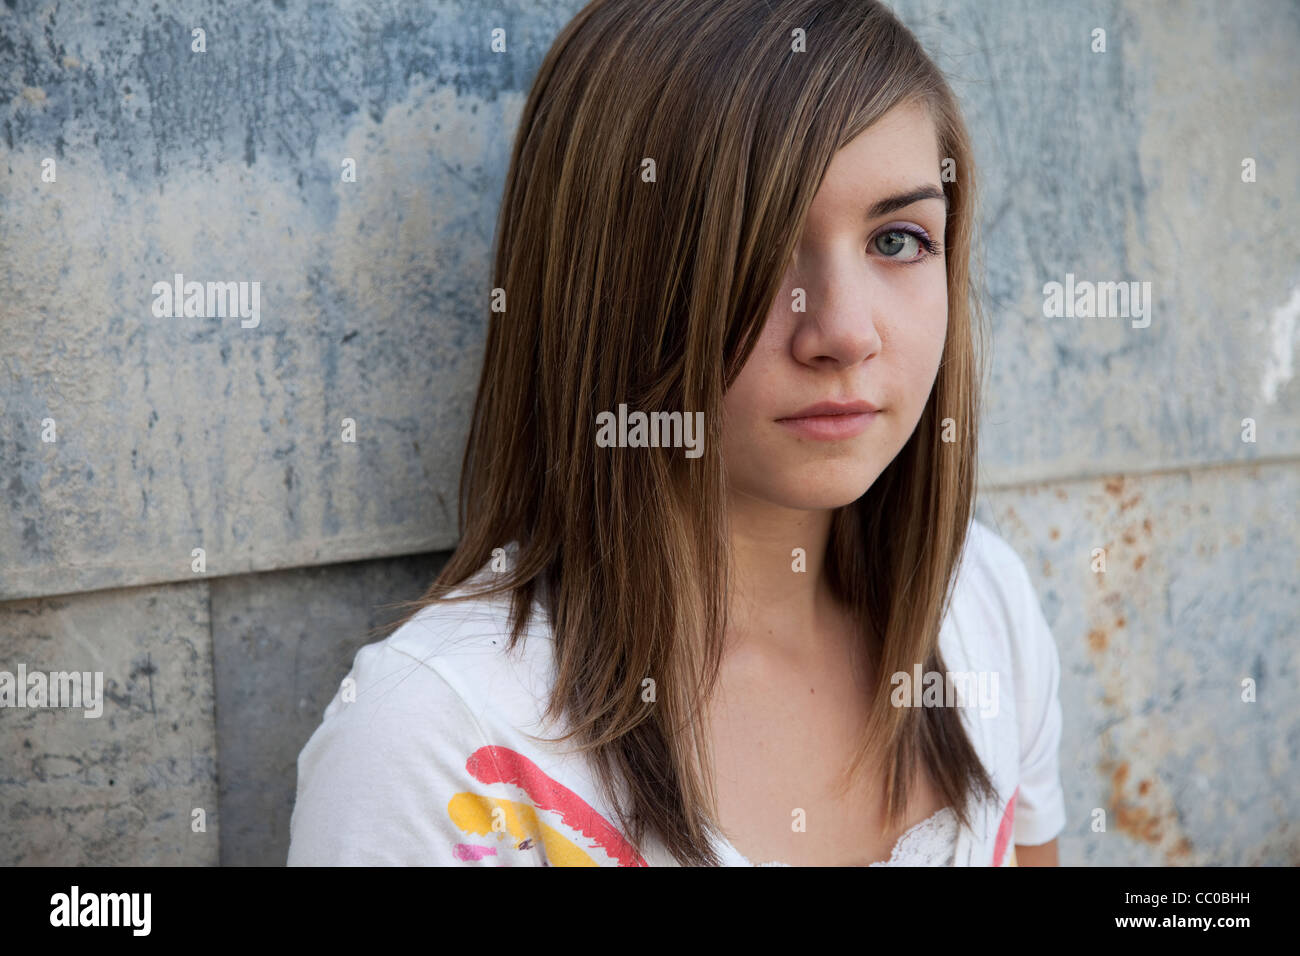 Teenage girl with somber expression against grunge wall Stock Photo